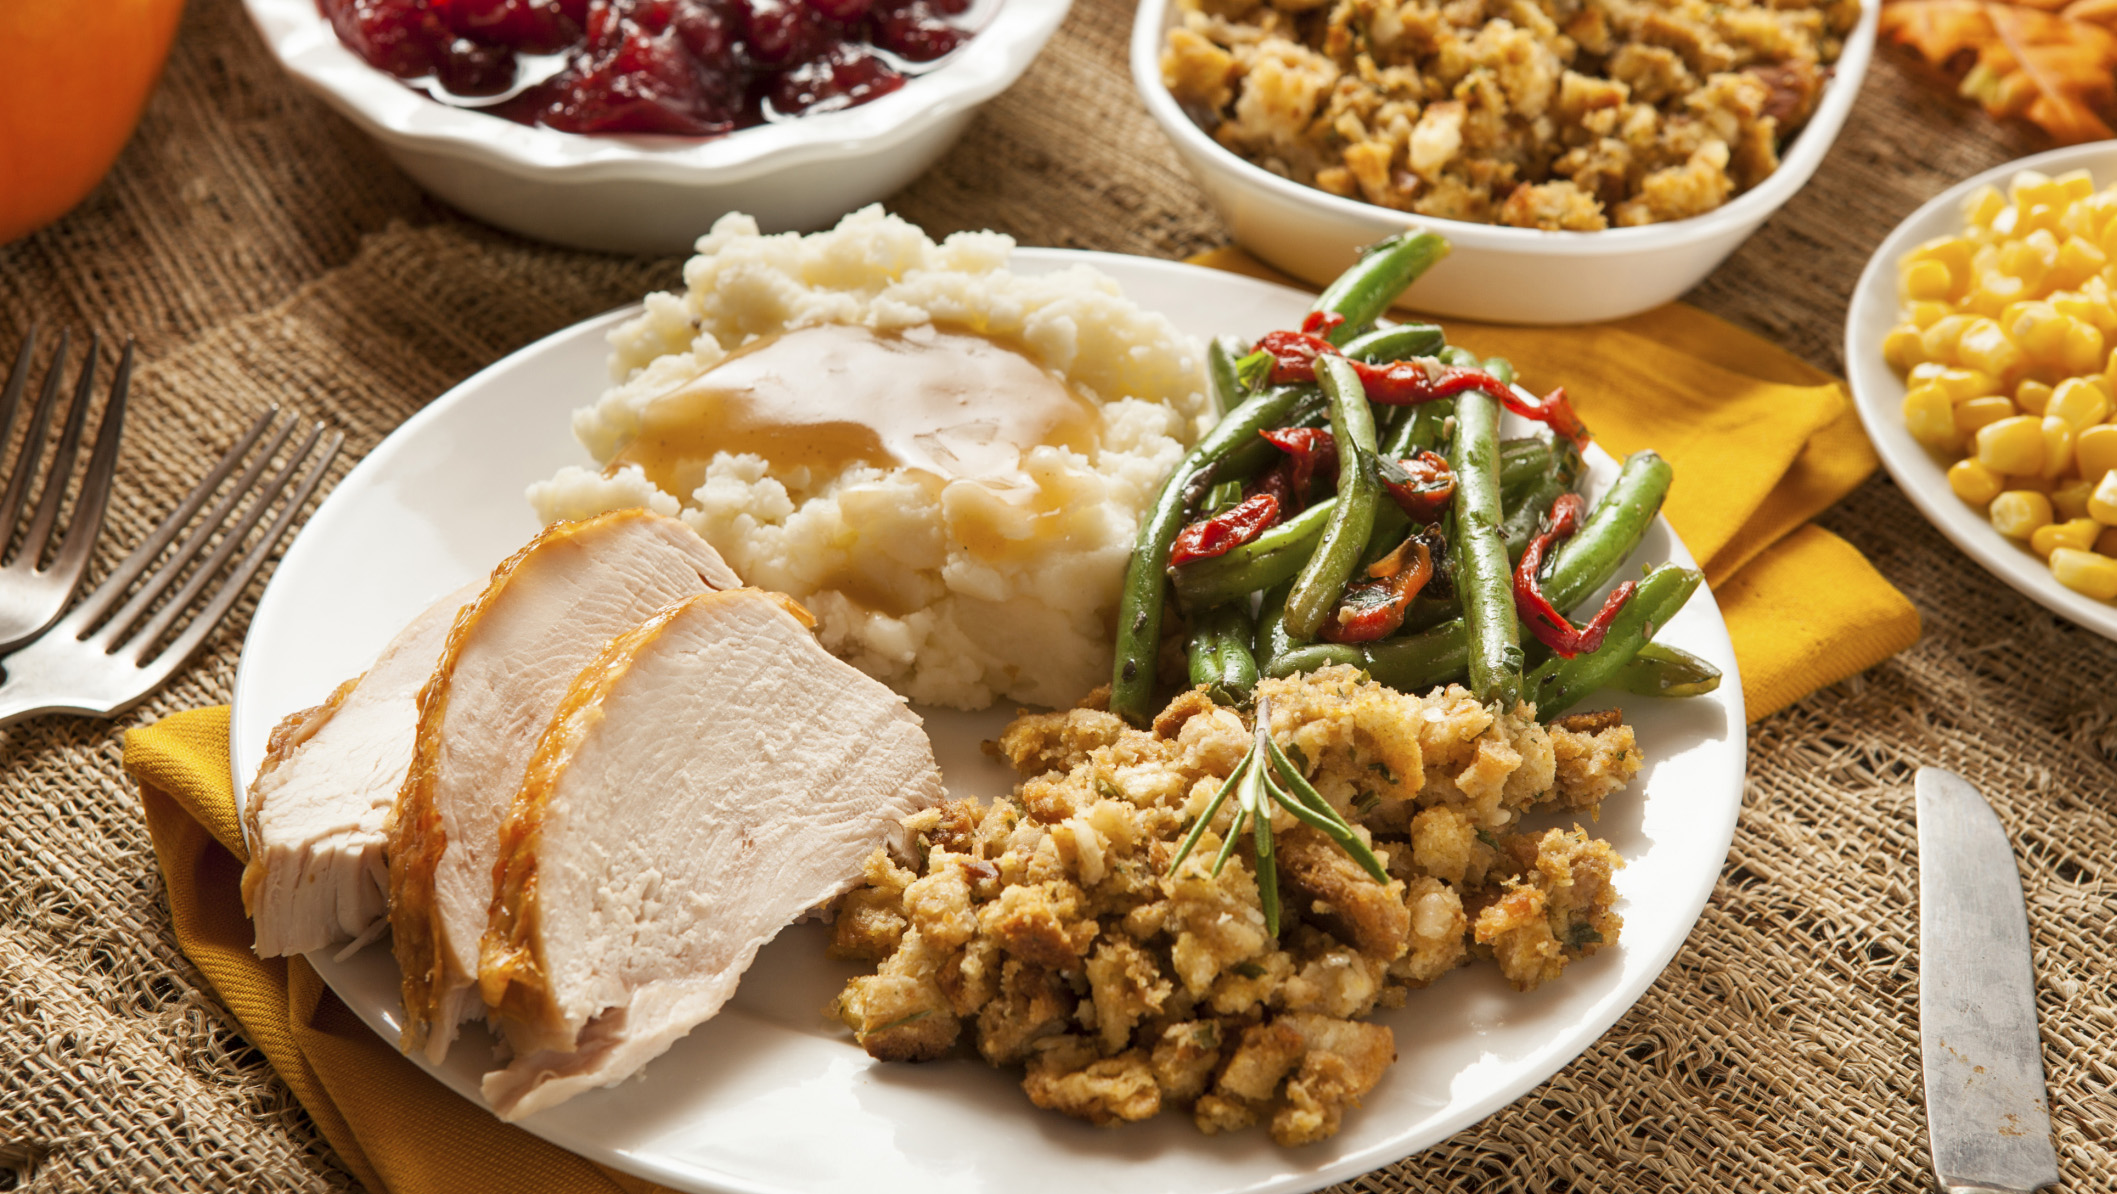 Top 5 Best Apps for Finding Thanksgiving Dinner Ideas | Heavy.com